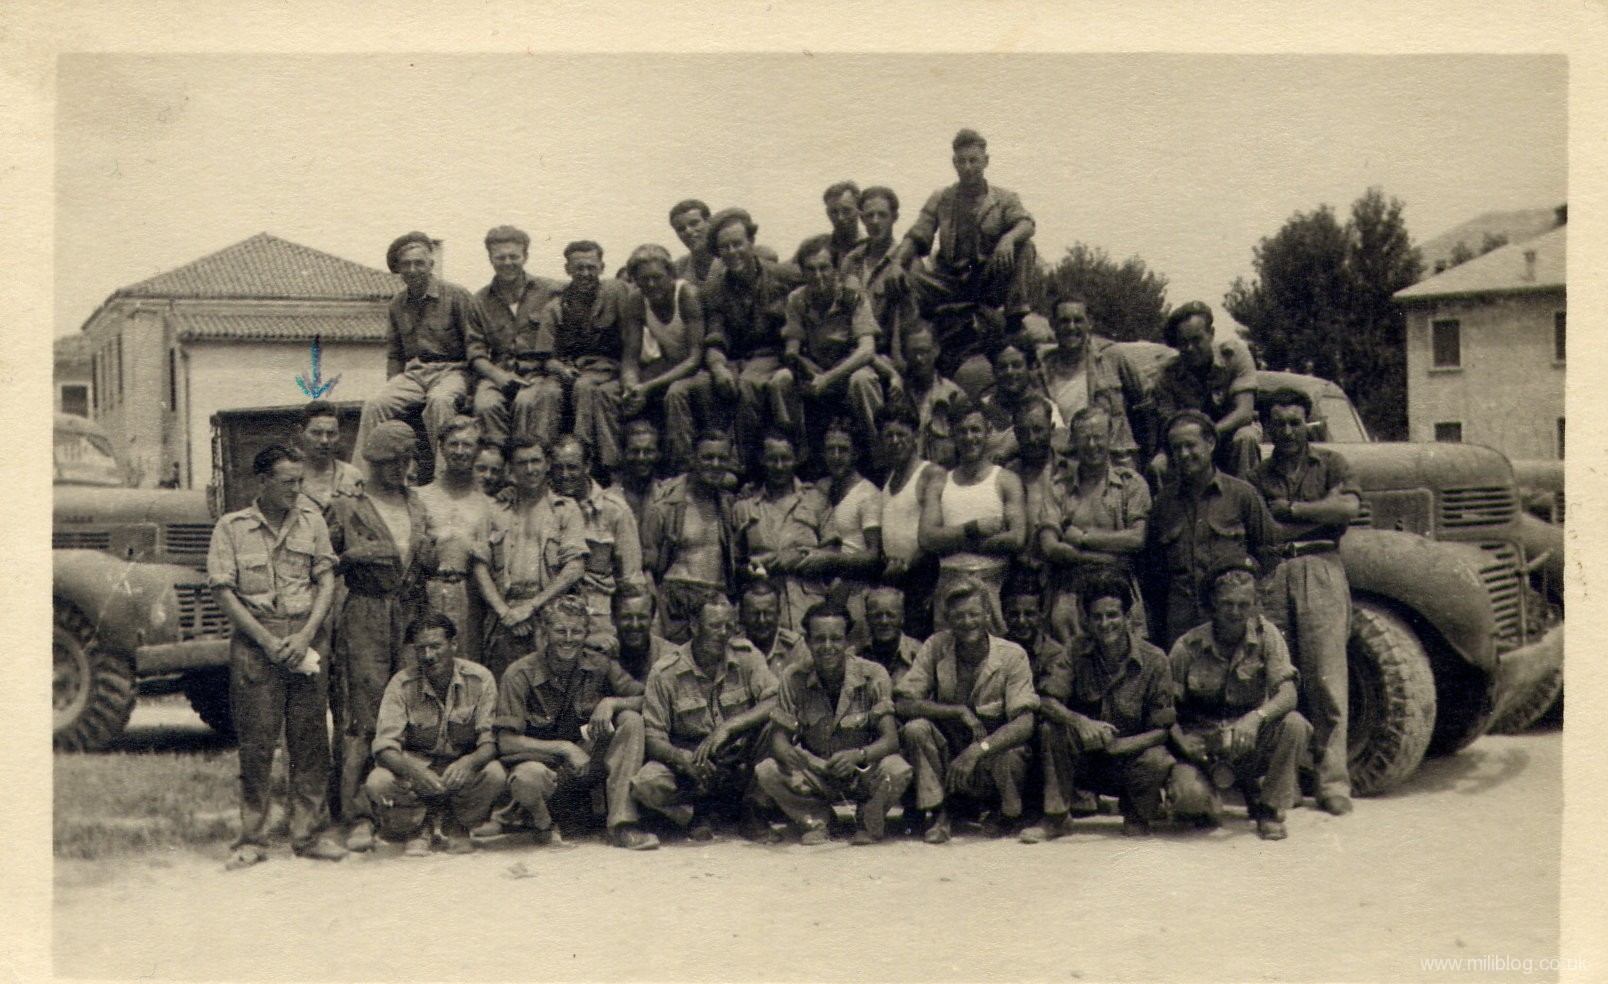 RASC 918 Company, B Platoon with Canadian Dodge Truck, possibly in Tunisia 